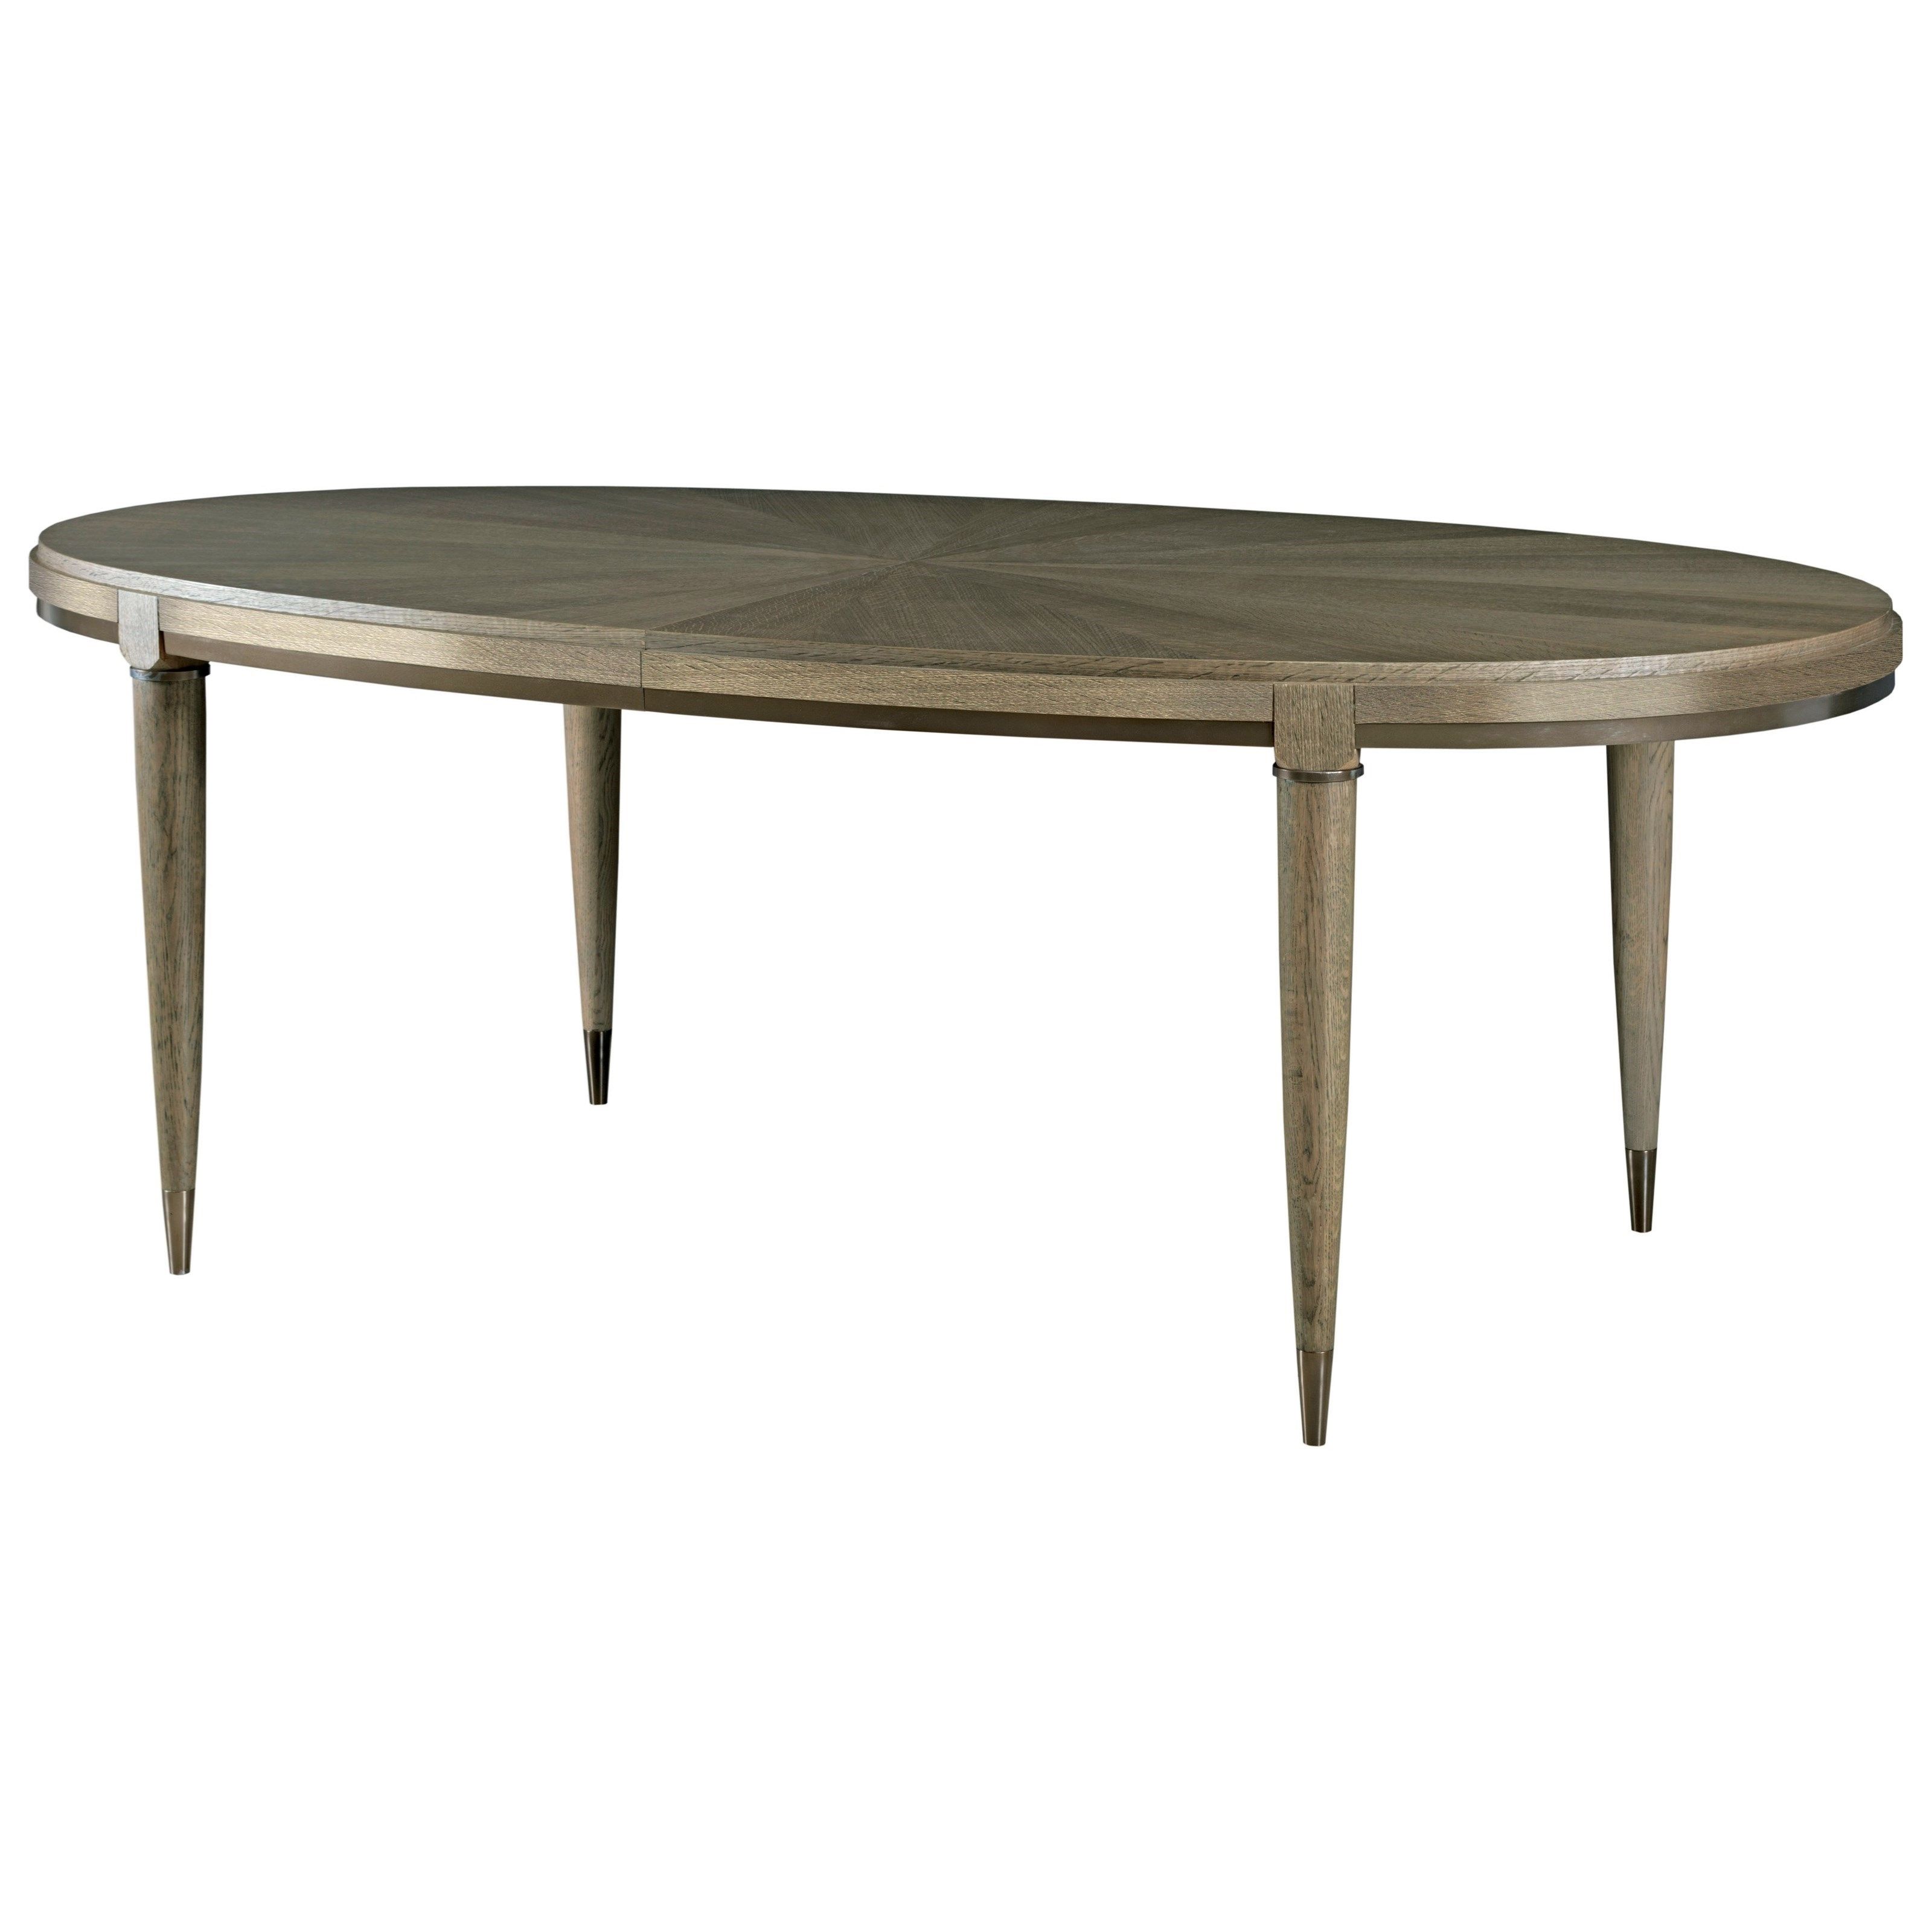 Newest Magnolia Home Array Dining Tables By Joanna Gaines With Regard To American Drew Ad Modern Classics Contemporary Oval Lloyd Dining (View 24 of 25)